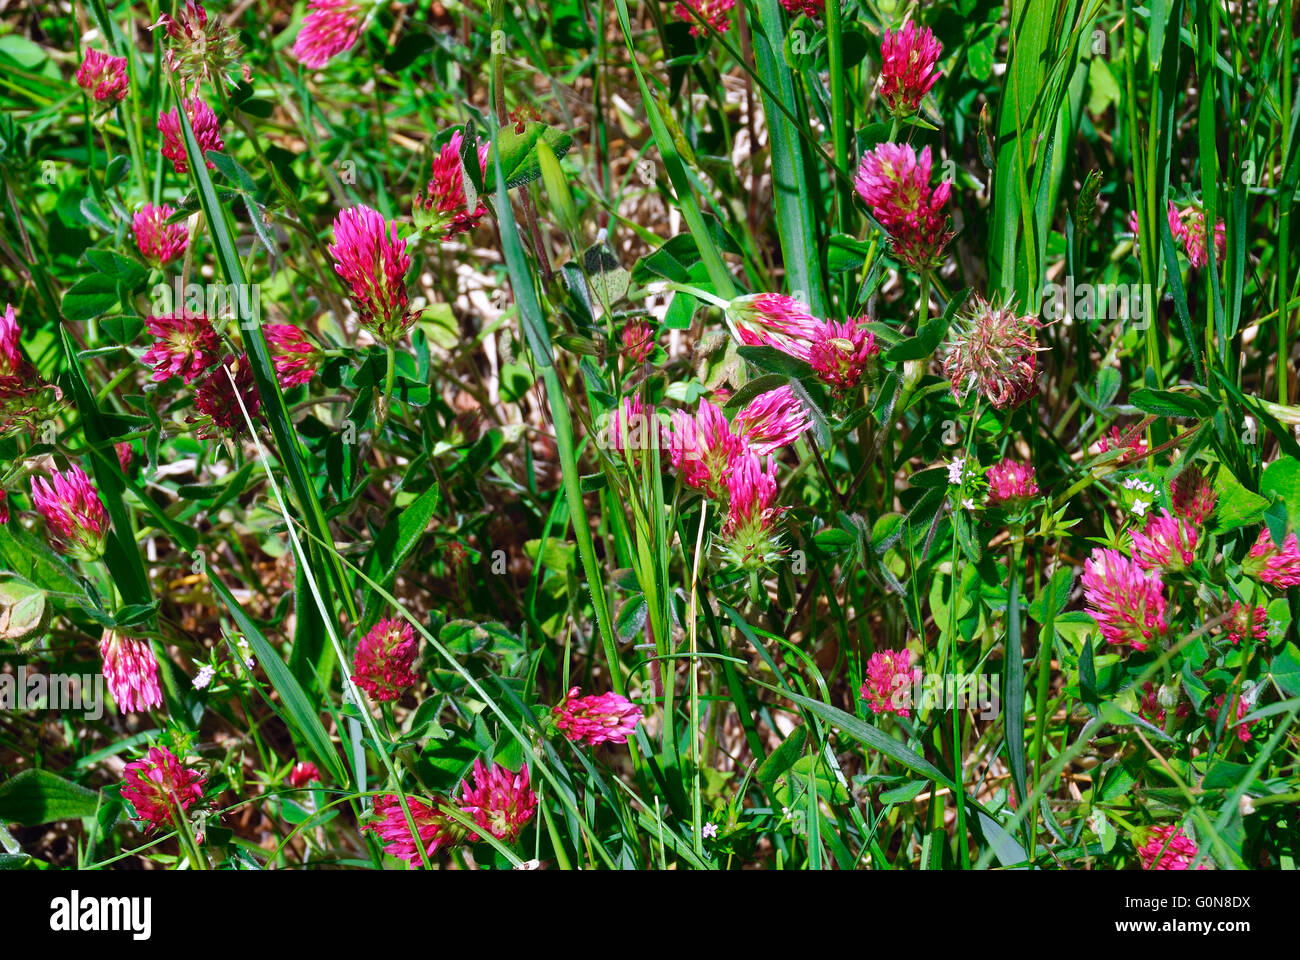 Trifolium pratense, the red clover is a herbaceous species of flowering plant in the bean family Fabaceae, native to Europe, Western Asia and northwest Africa, but planted and naturalised in many other regions. Stock Photo